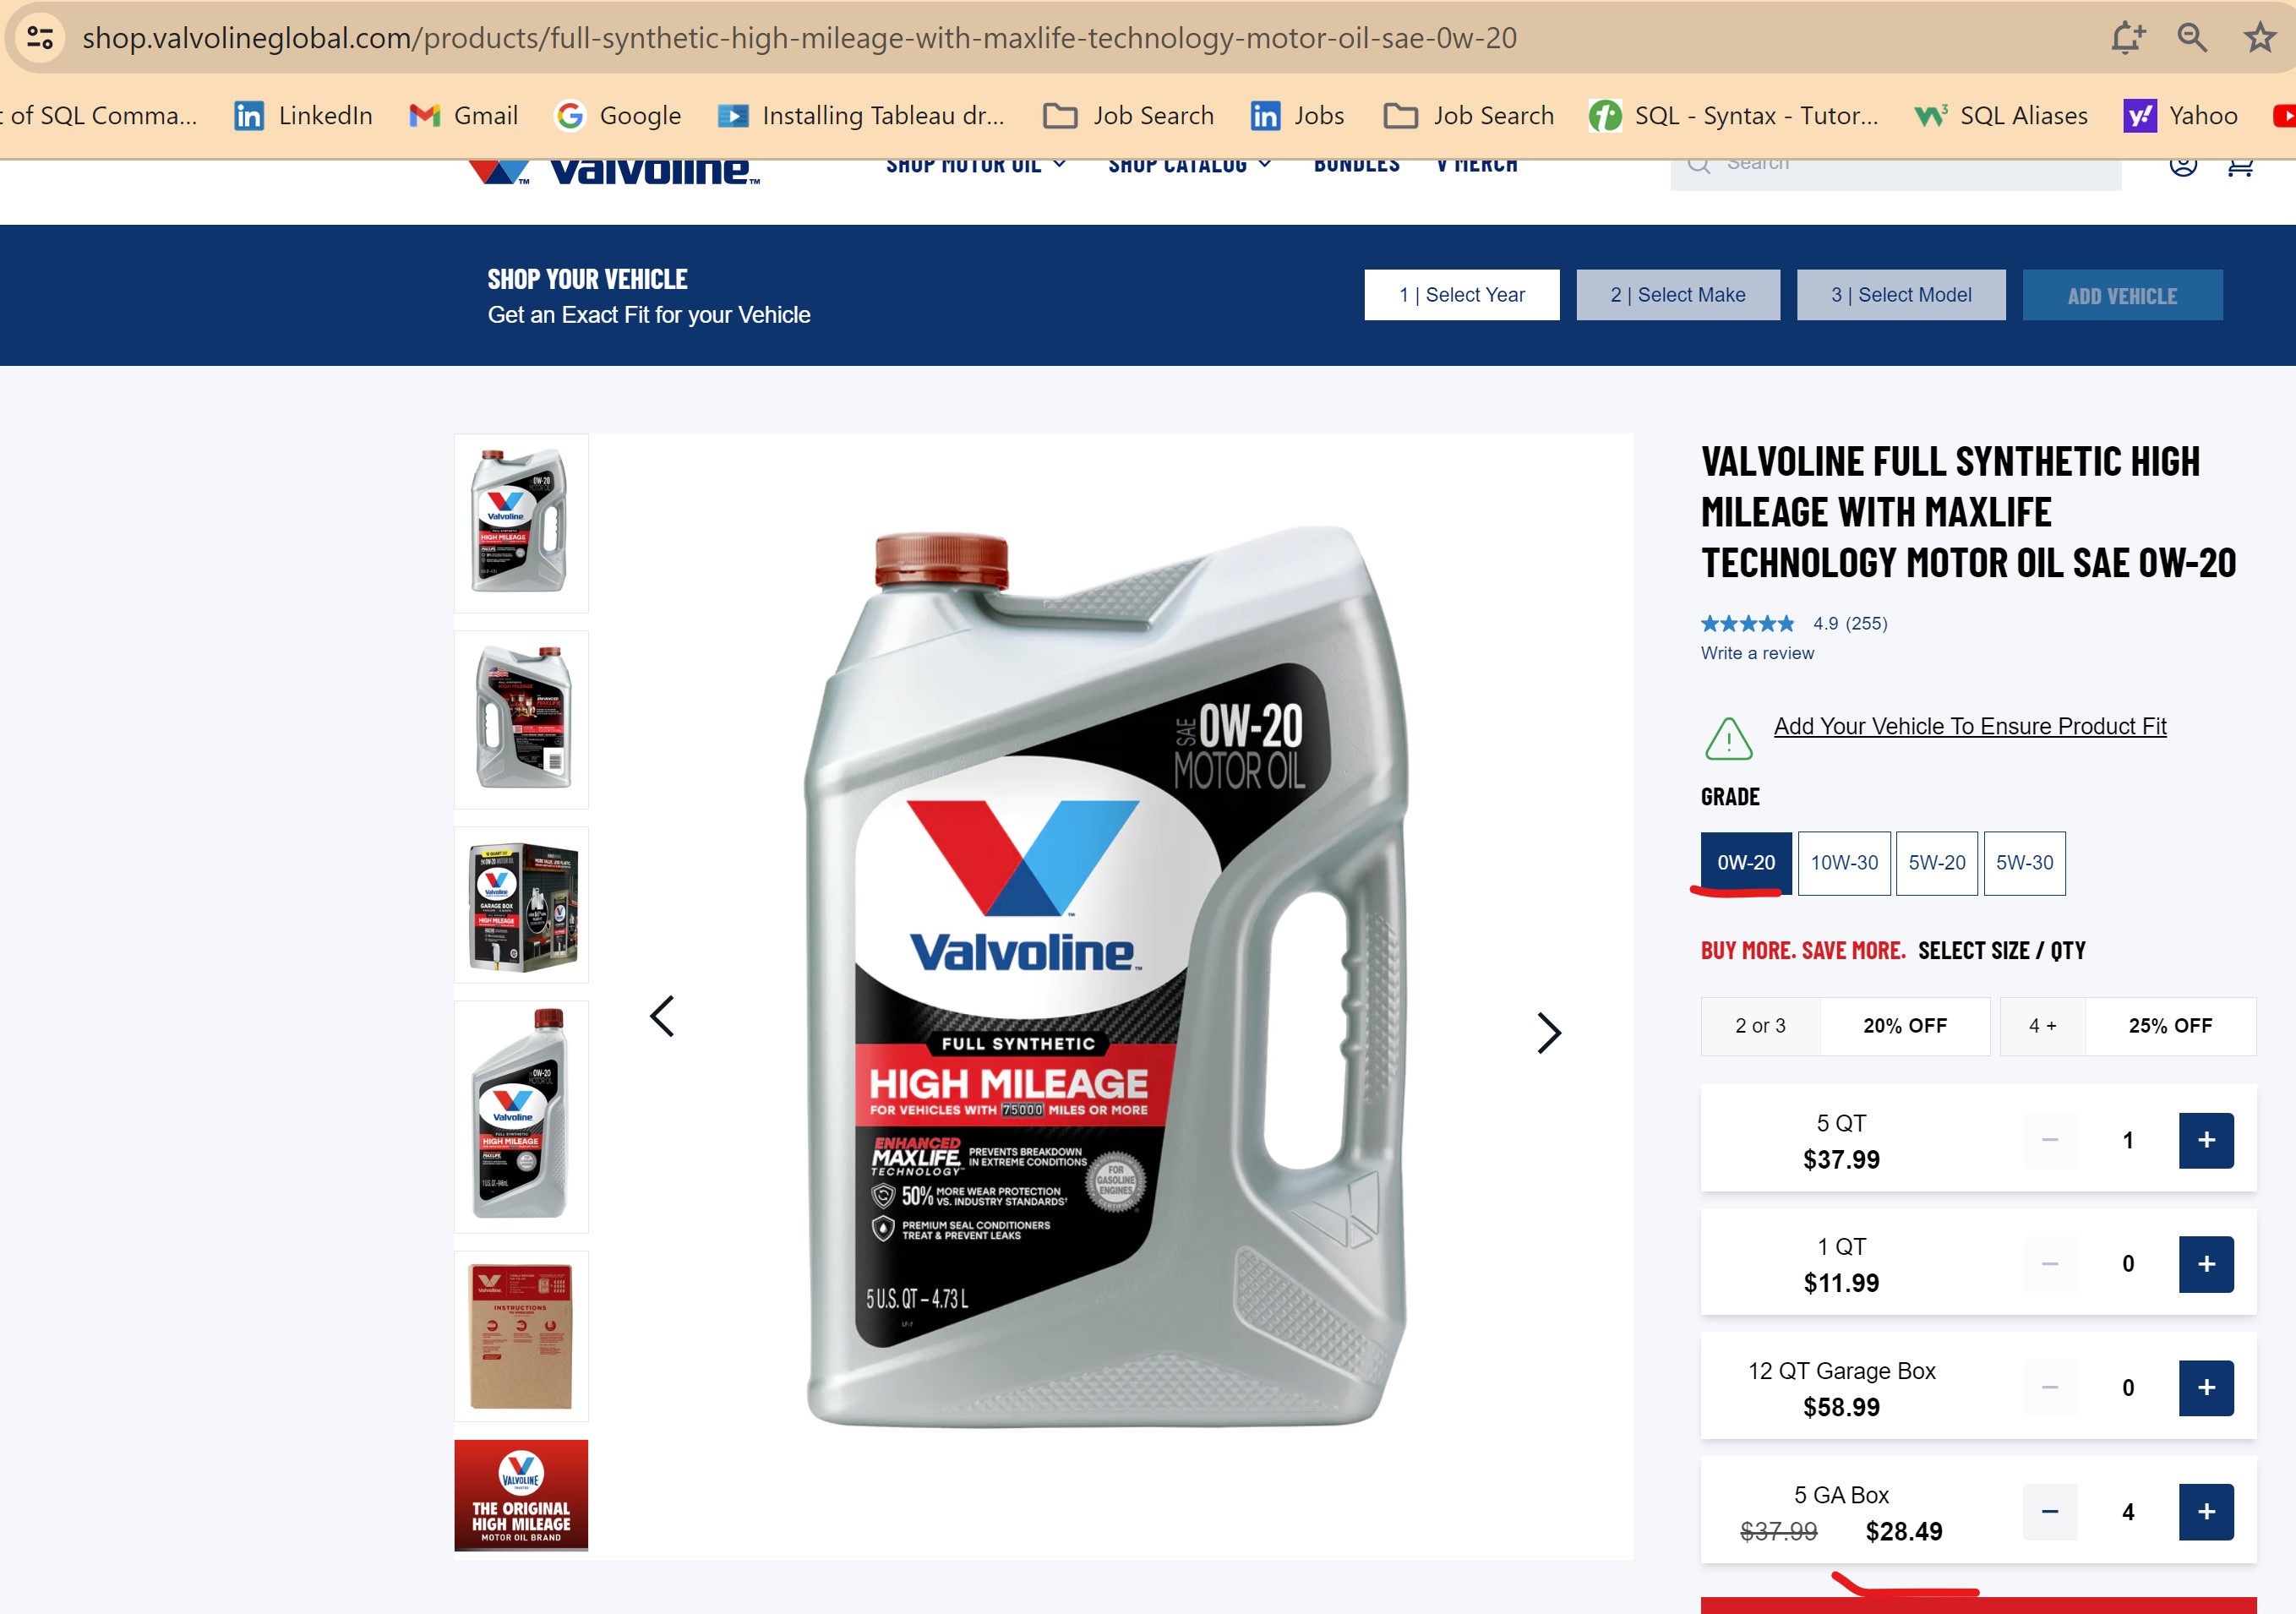 5 Gallons Valvoline Full Synthetic High Mileage with MaxLife Motor Oil - $37.99 for 1 28.99 Ea, for 4 (0W20, 5W20 & 5W30)